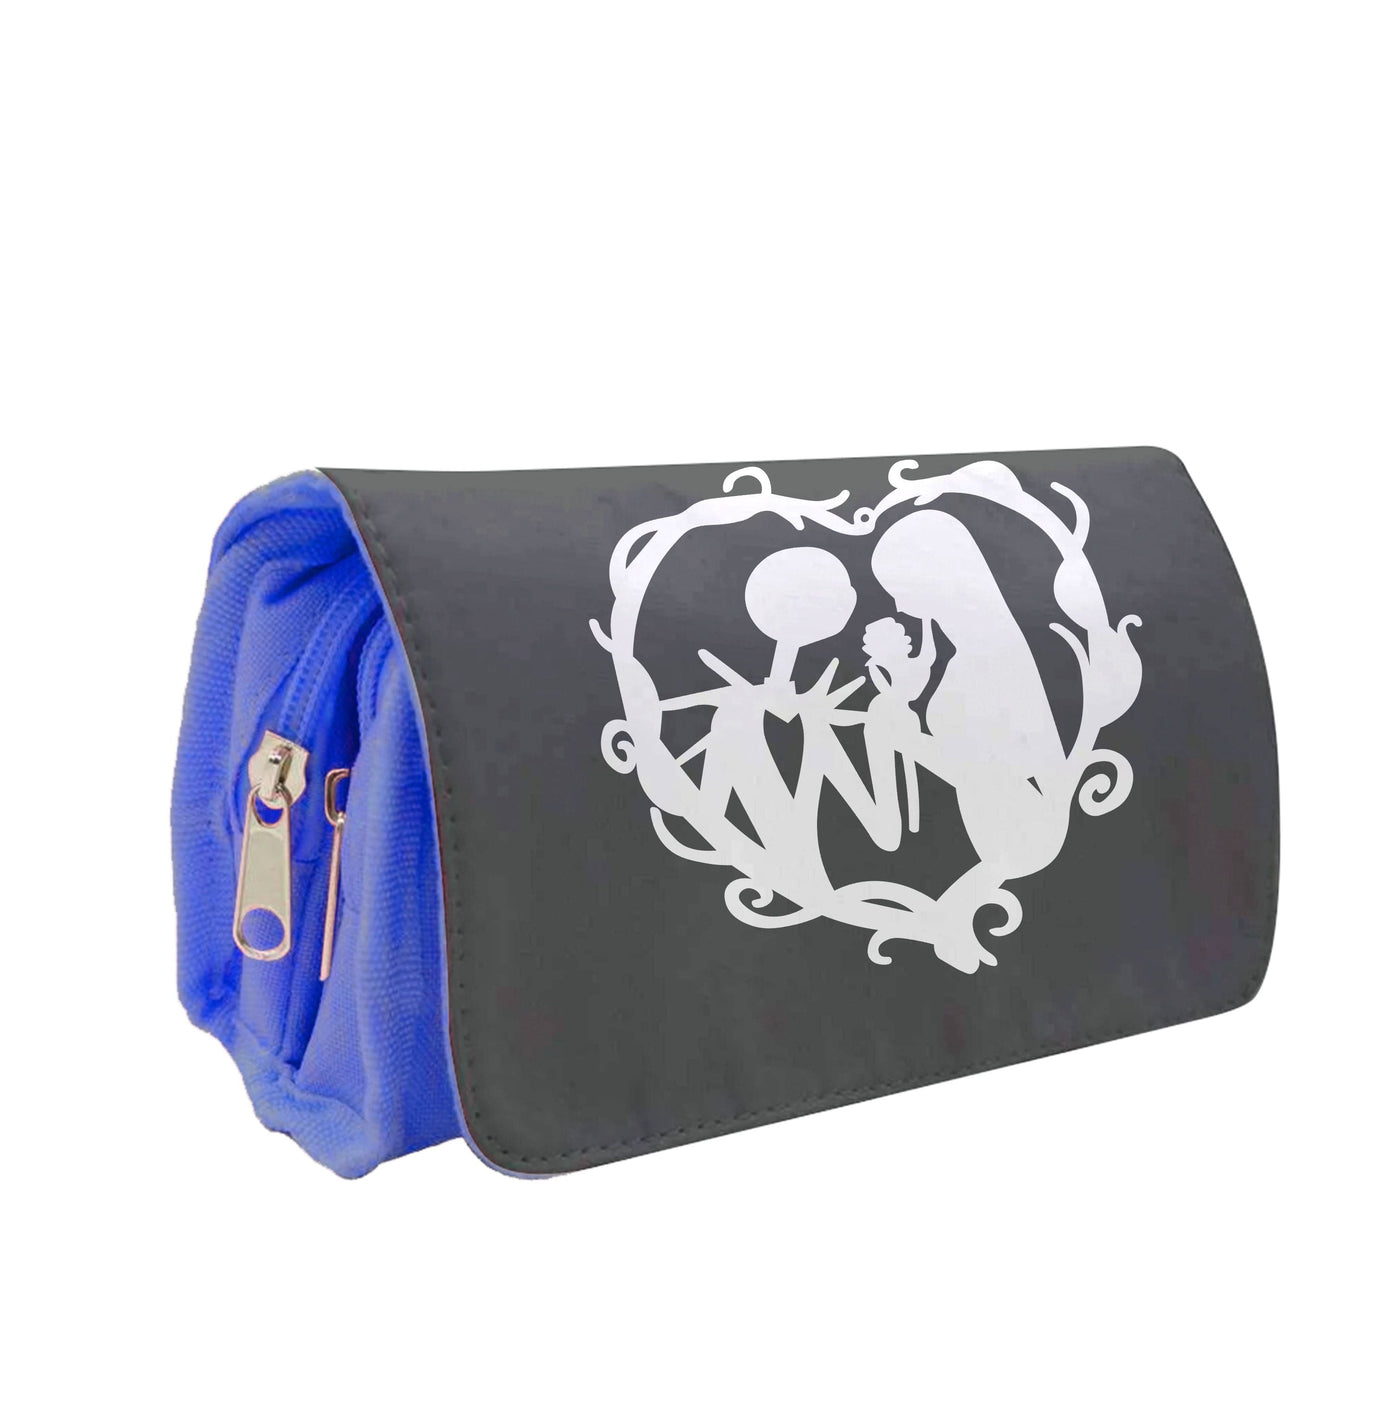 In Love - The Nightmare Before Christmas Pencil Case